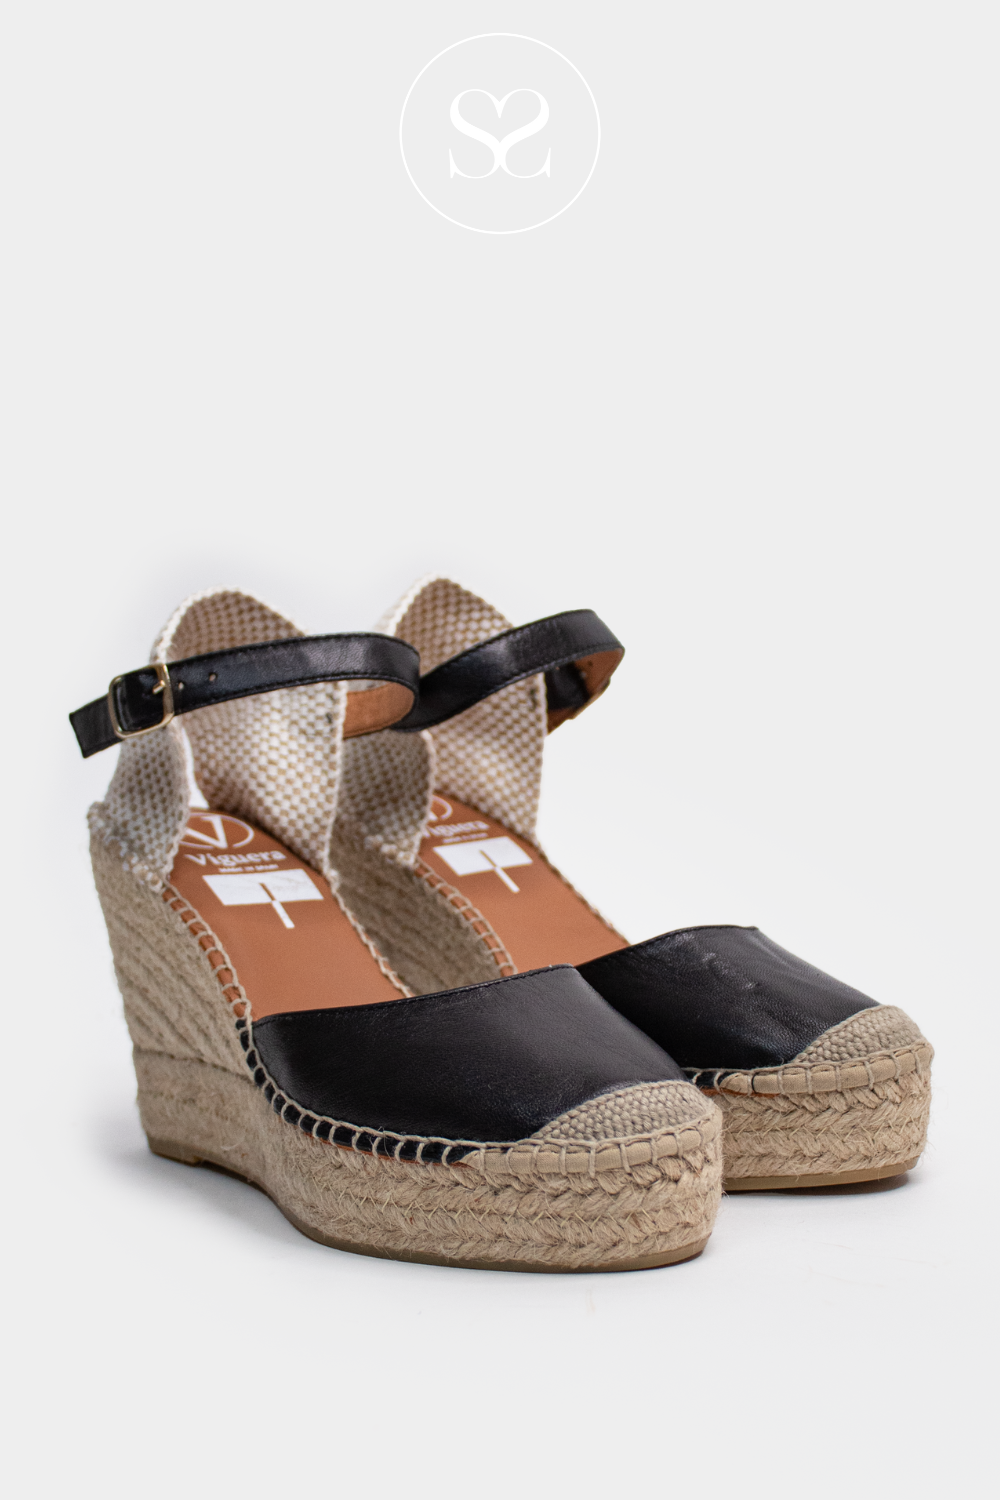 VIGUERA 1632 BLACK LEATHER ESPADRILLE WEDGE SANDALS WITH PLATFORM SOLE AND ANKLE STRAP